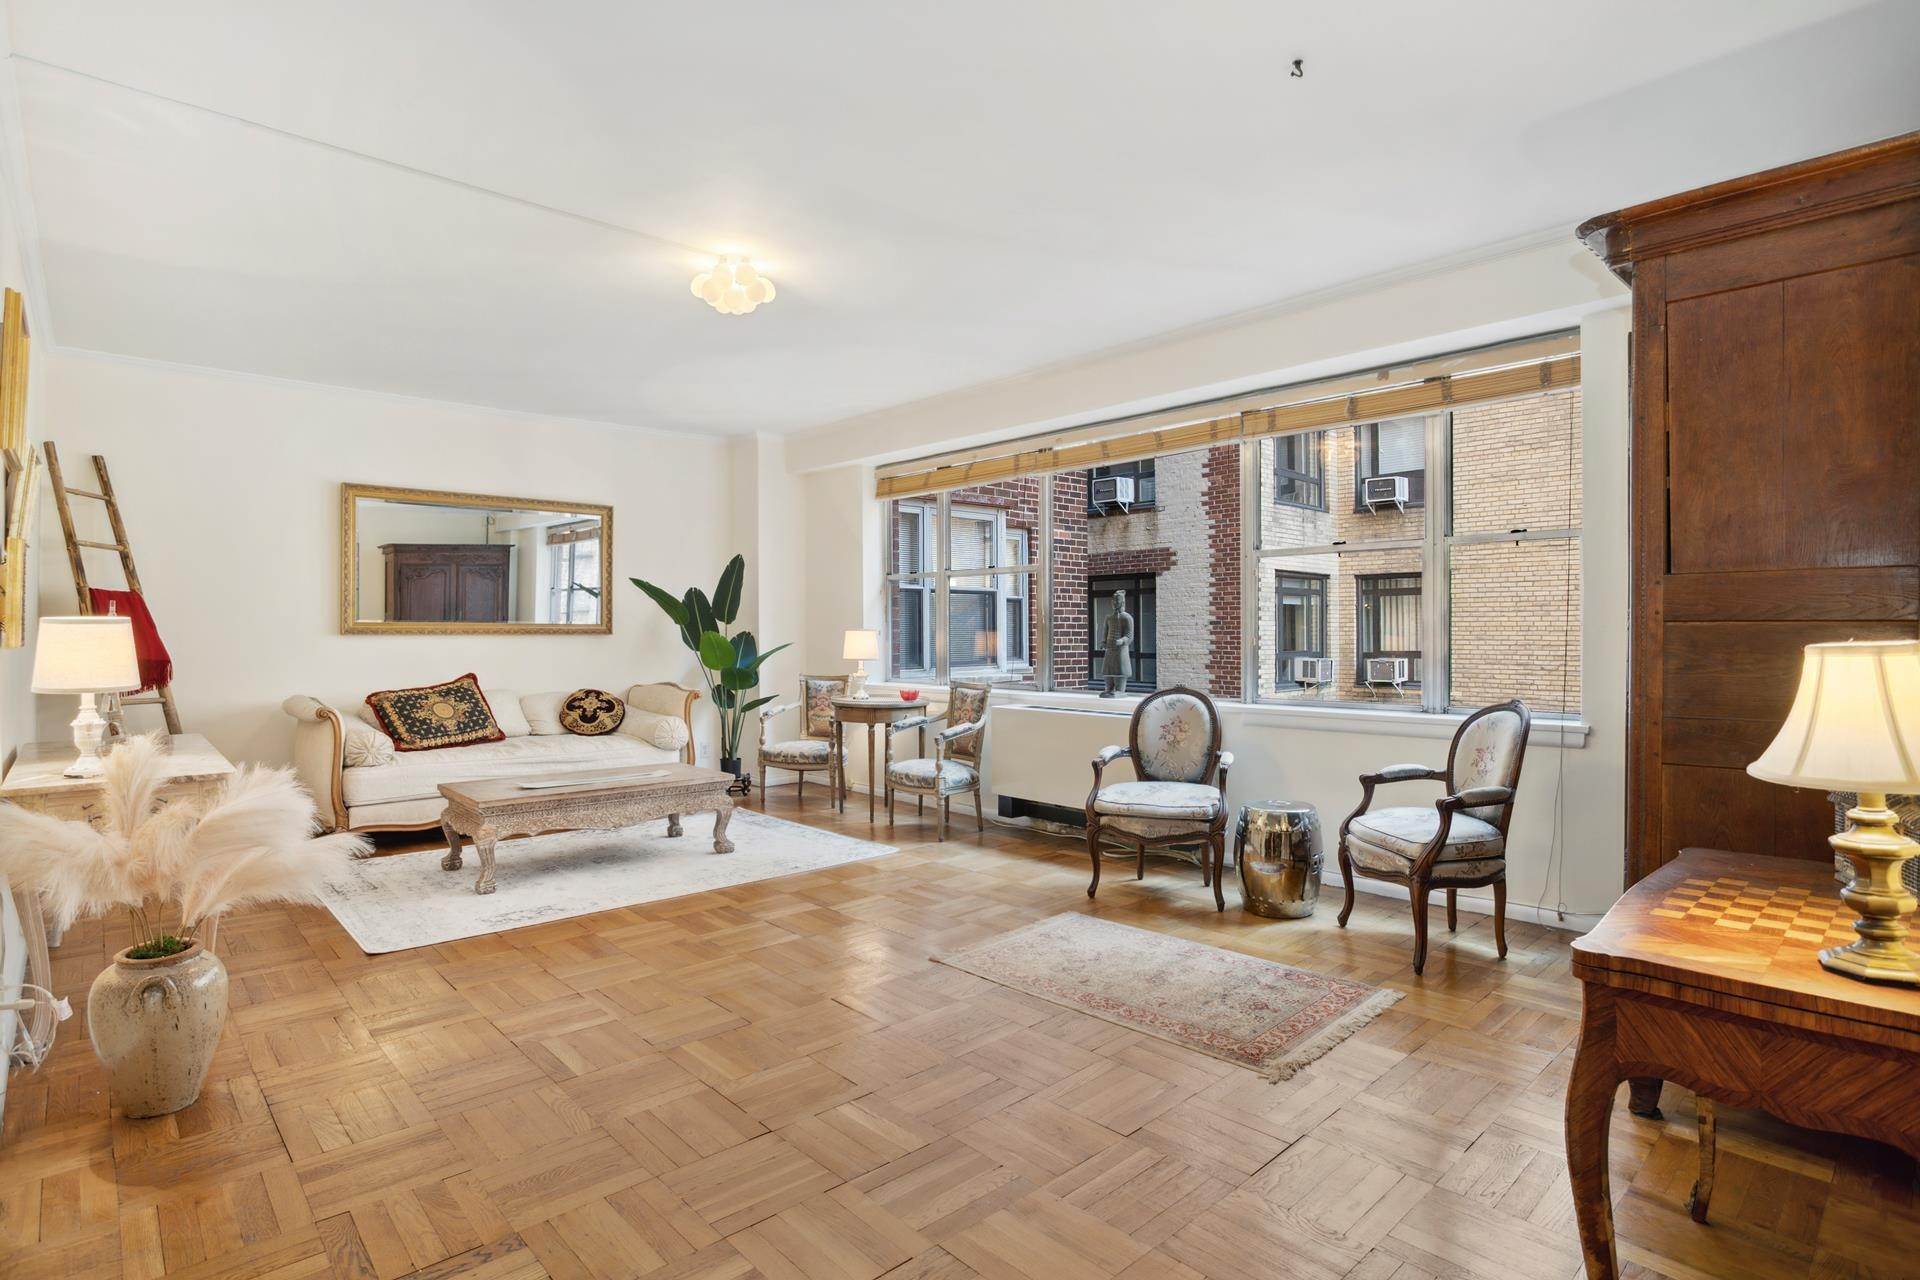 Cooperative for Sale at Beekman, Manhattan, NY 10022